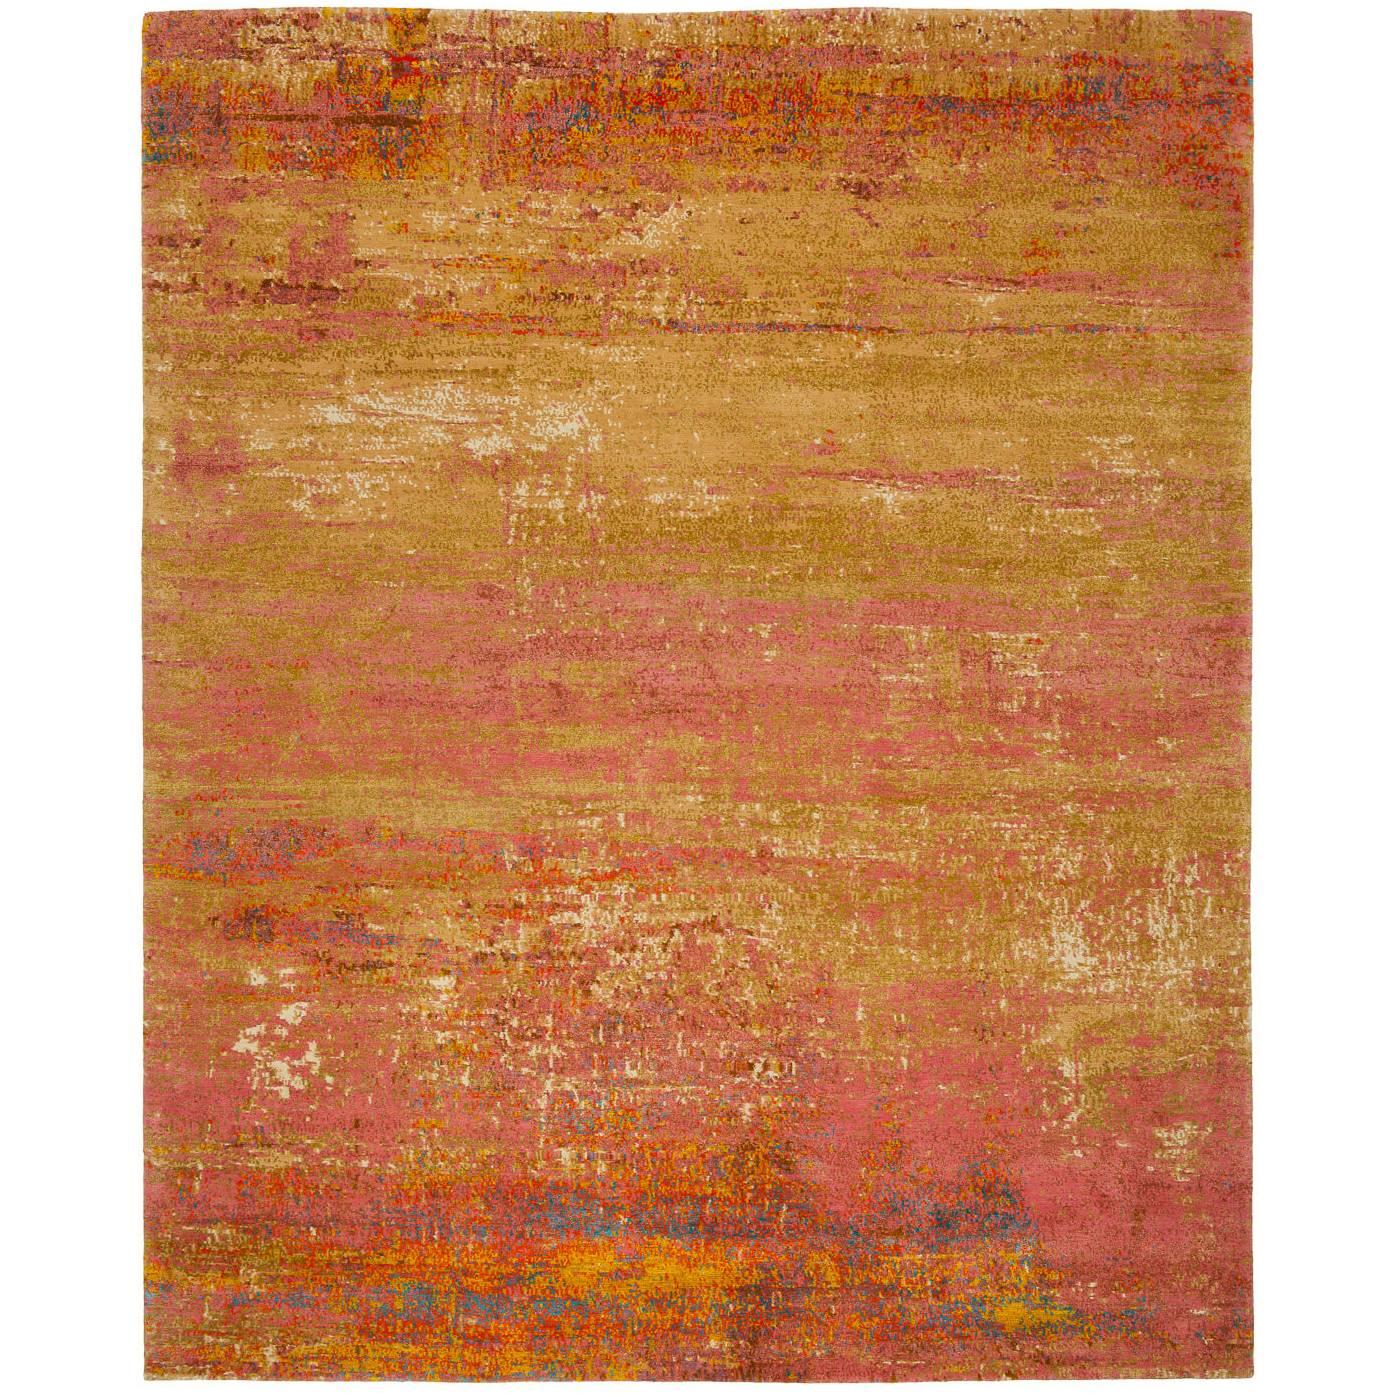 Artwork 19 Pink Accents from Artwork Carpet Collection by Jan Kath For Sale